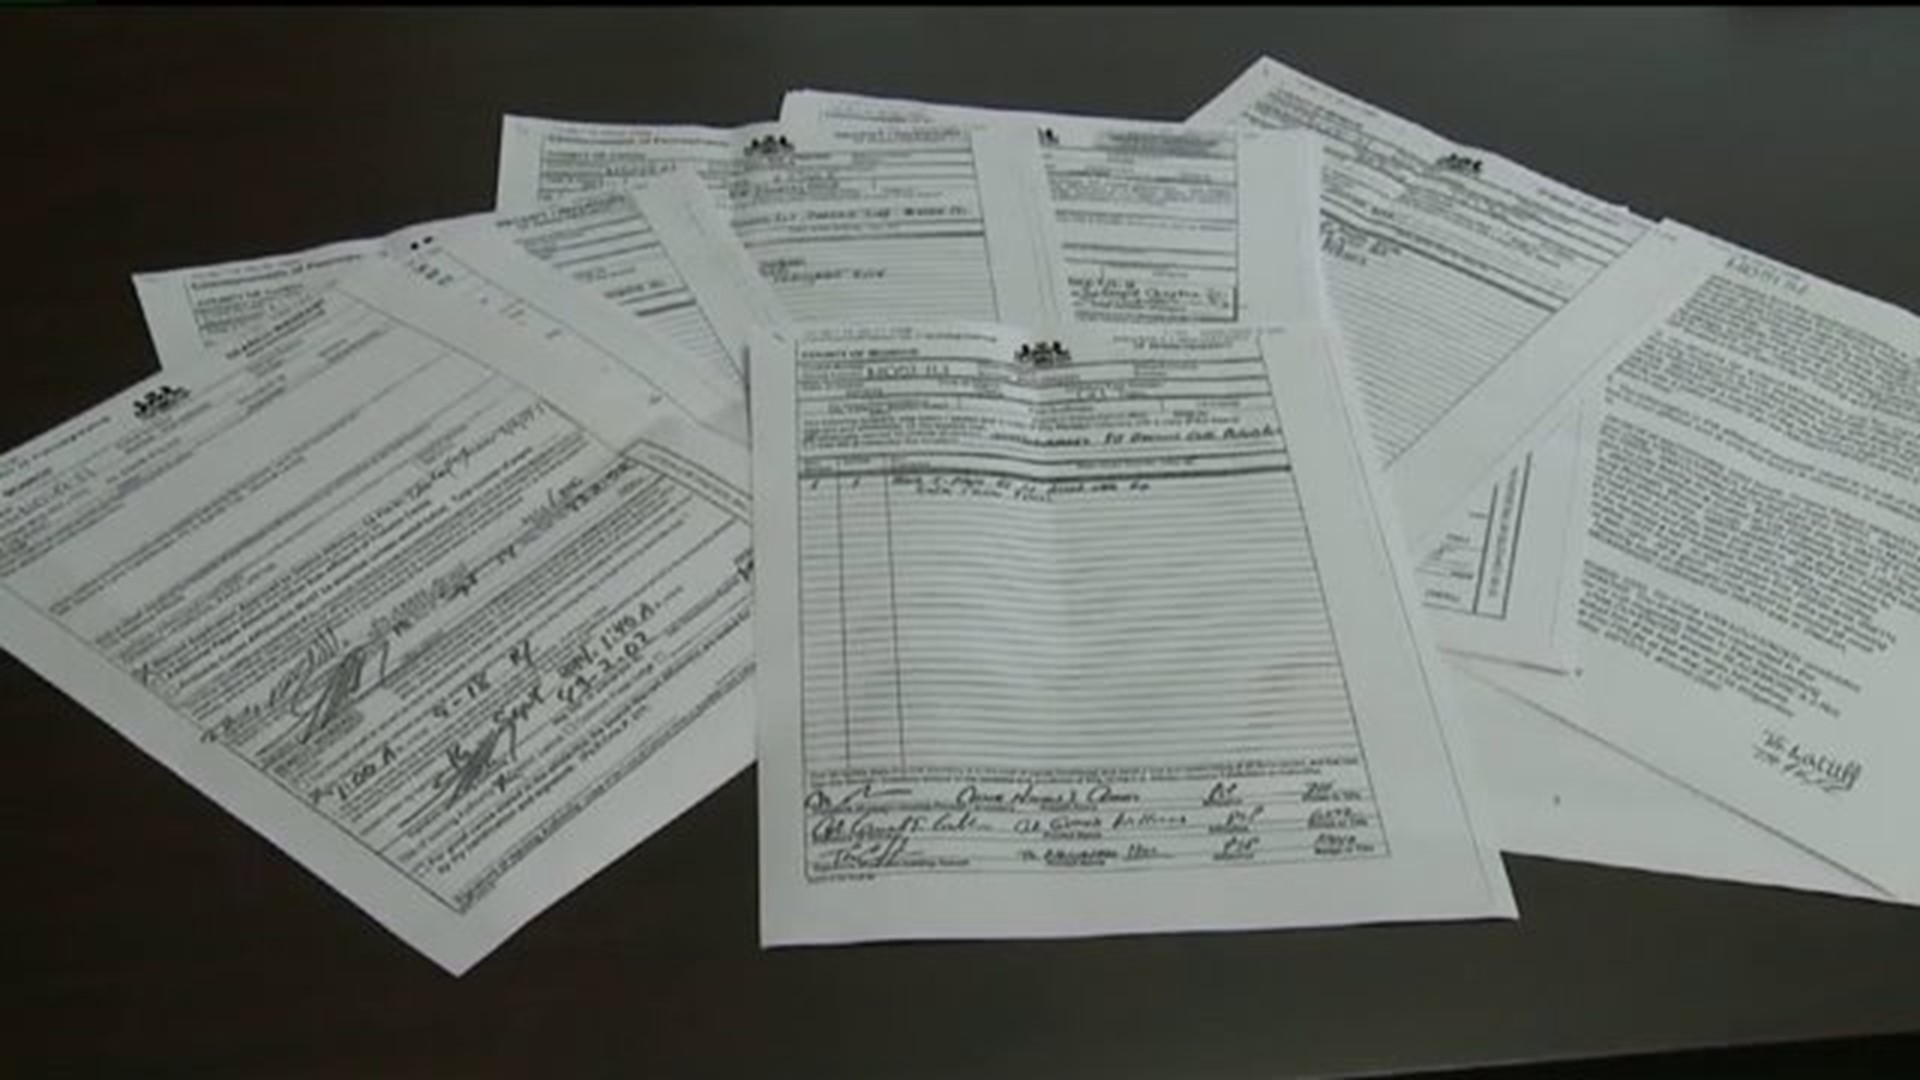 Search Warrants And Letters Give More Details On Frein Investigation